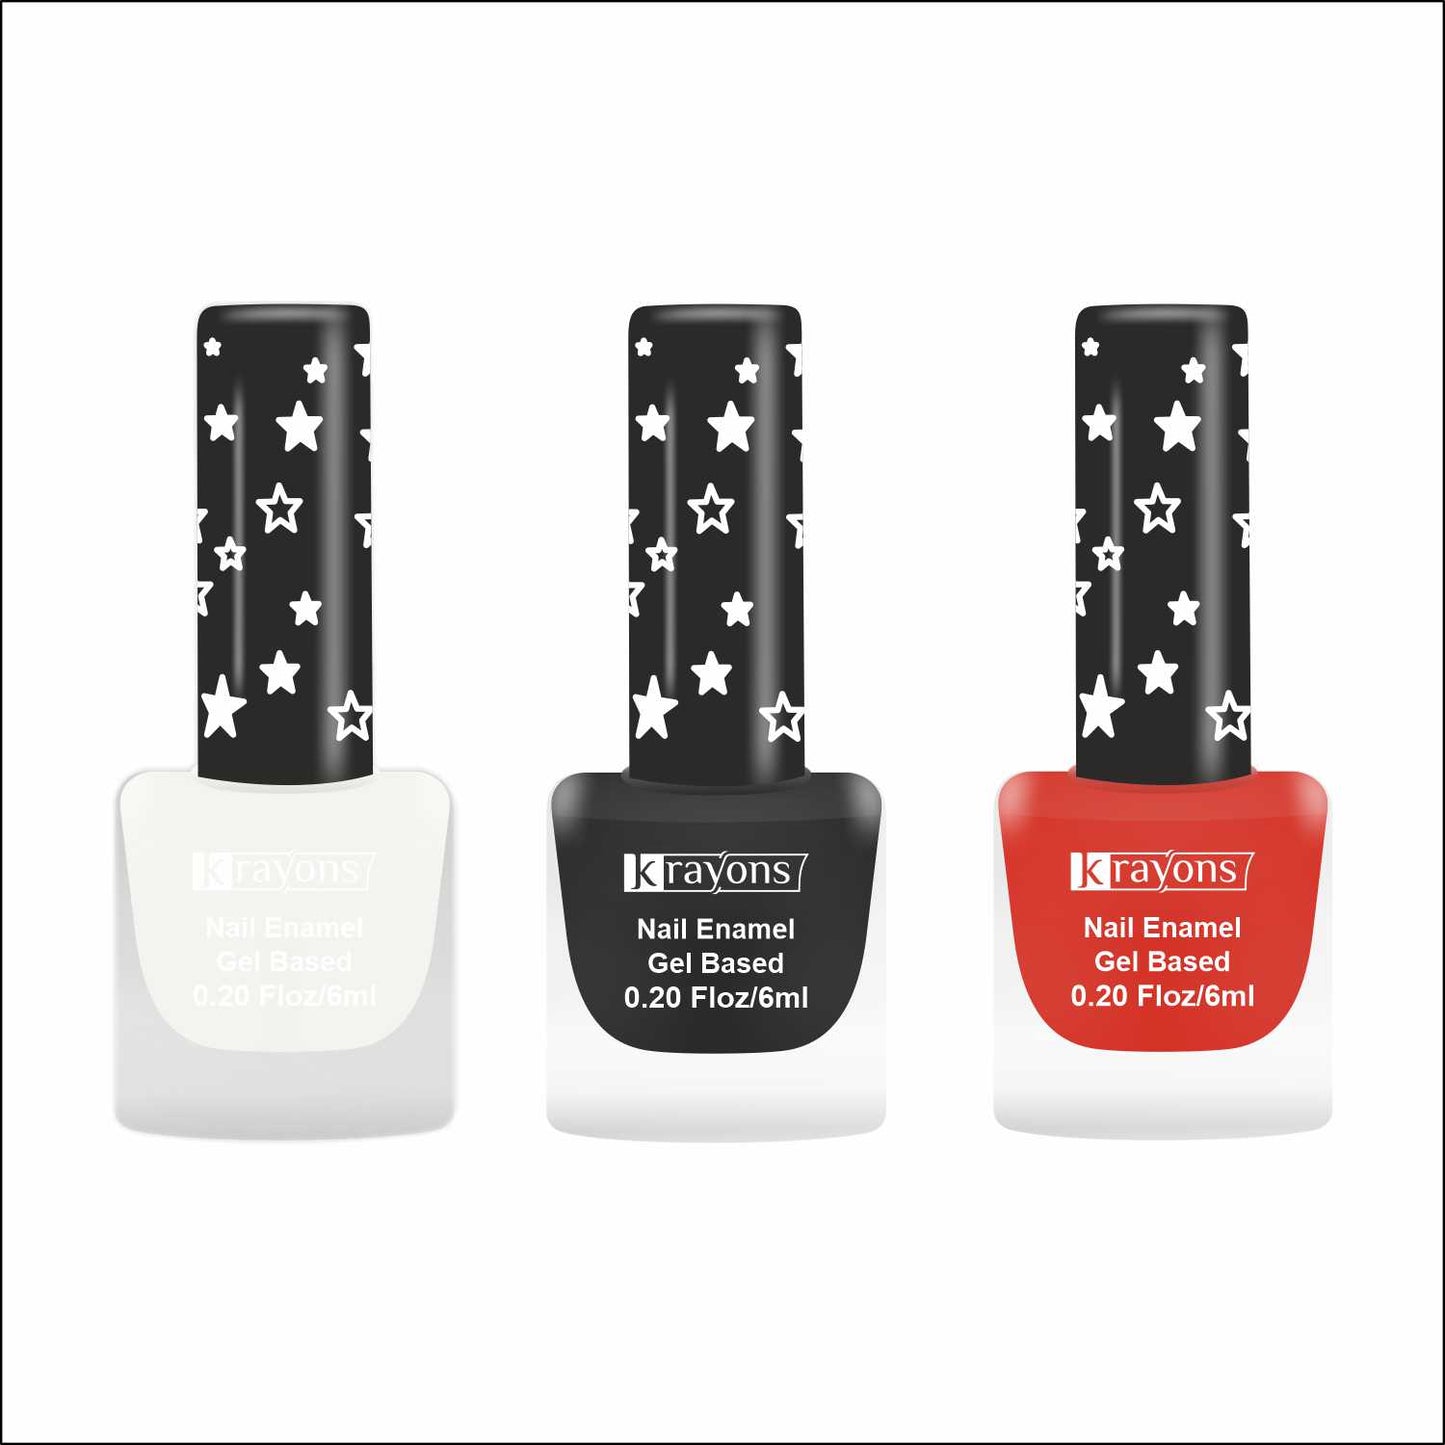 Krayons Cute Super Matte Finish Nail Enamel, Quick Dry, LongLasting, Snow White, Black Magnet, Ruby Red, 6ml Each (Pack of 3)